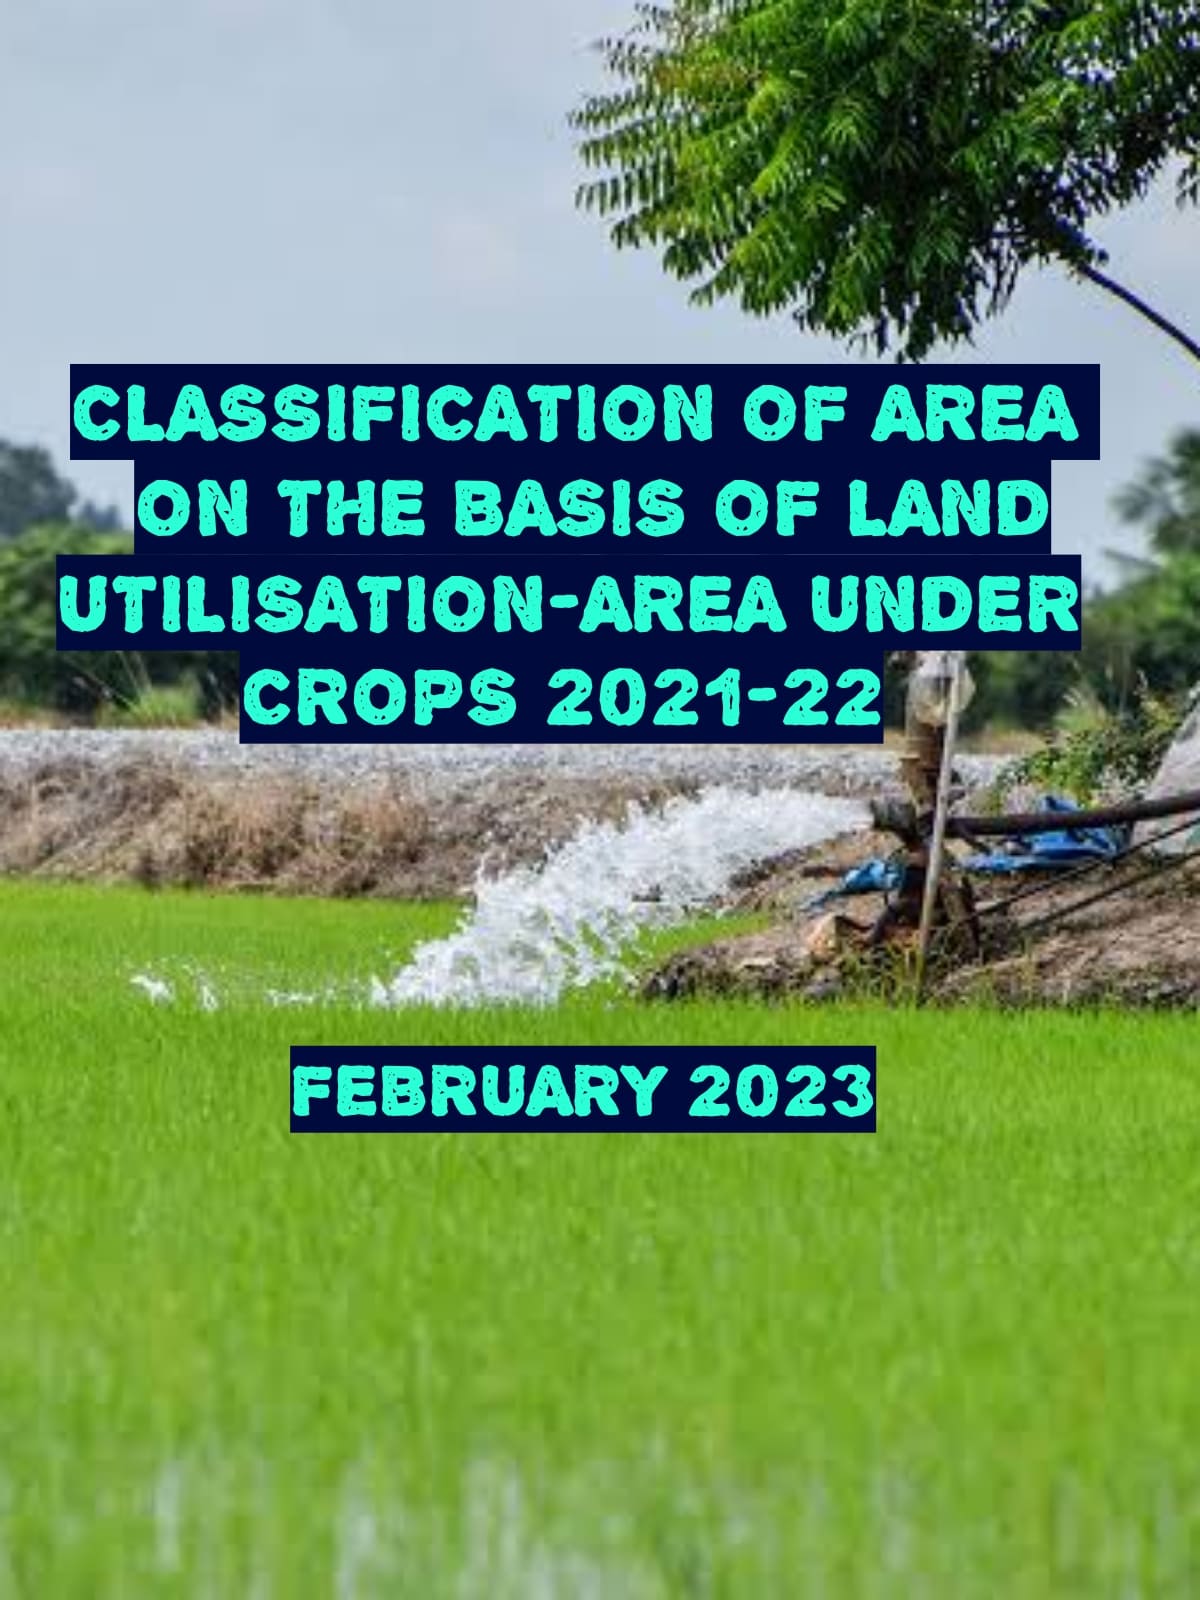 CLASSIFICATION OF AREA ON THE BASIS OF LAND UTILISATION-AREA UNDER CROPS 2021-22